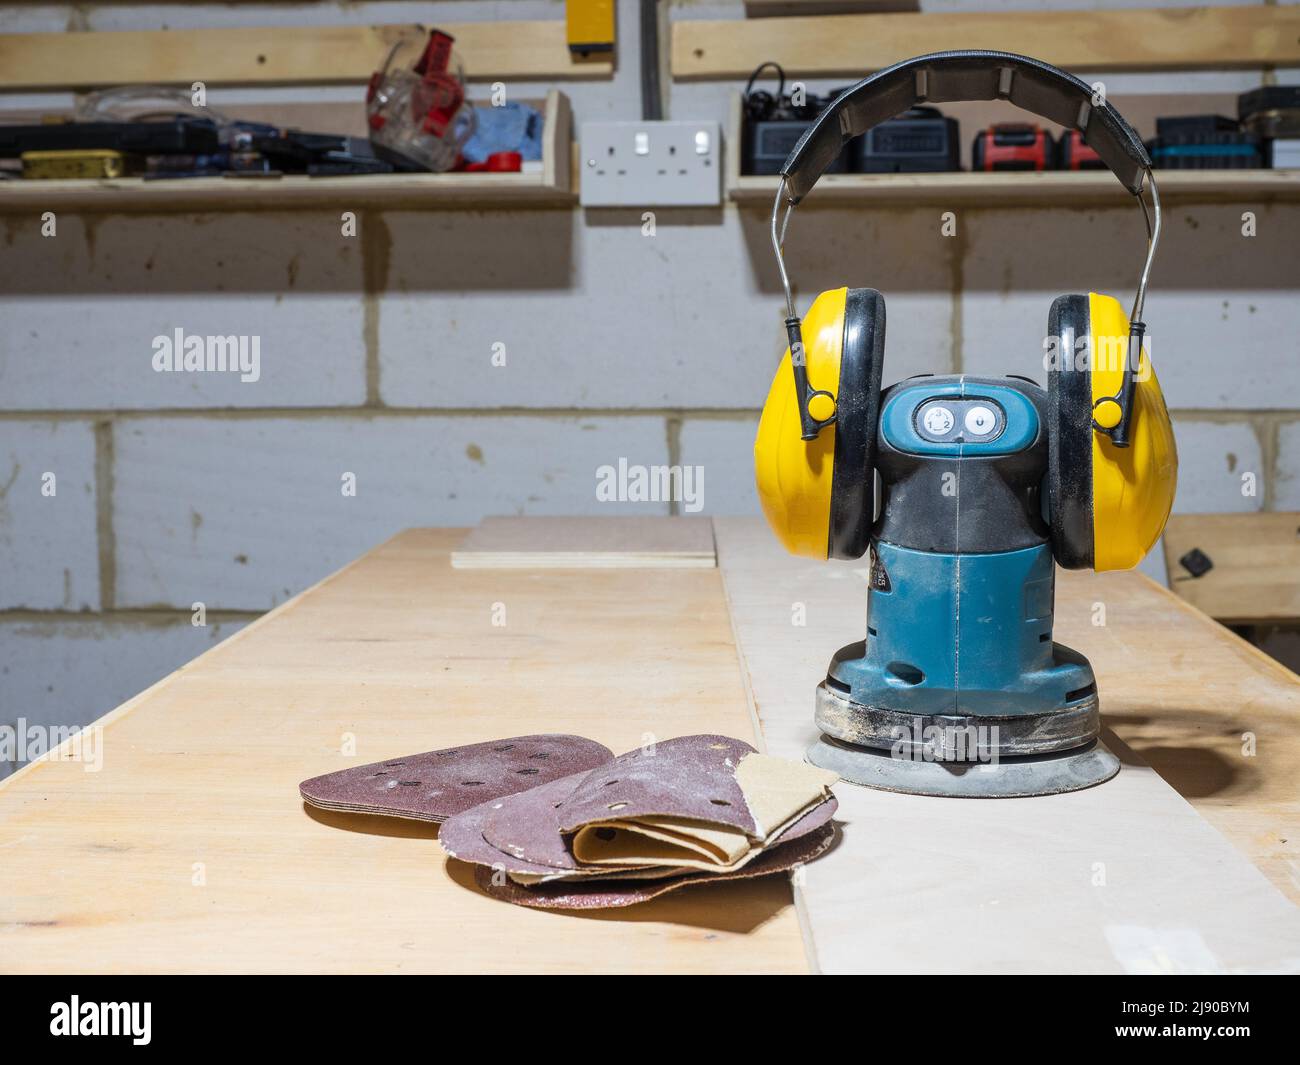 Cordless battery operated orbital sander with ear defenders Stock Photo